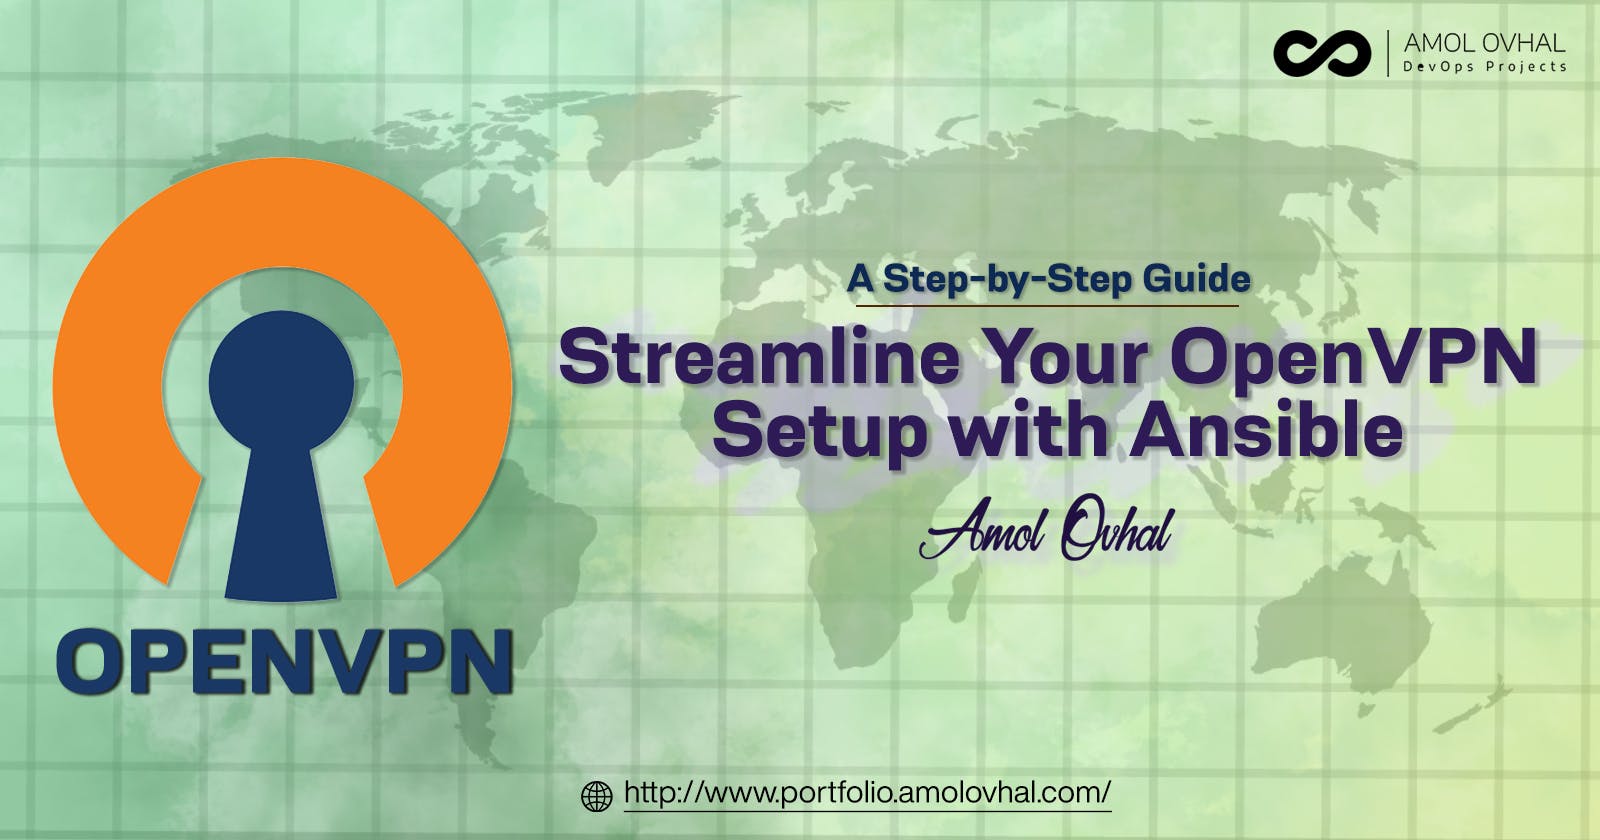 Streamline Your OpenVPN Setup with Ansible: A Step-by-Step Guide